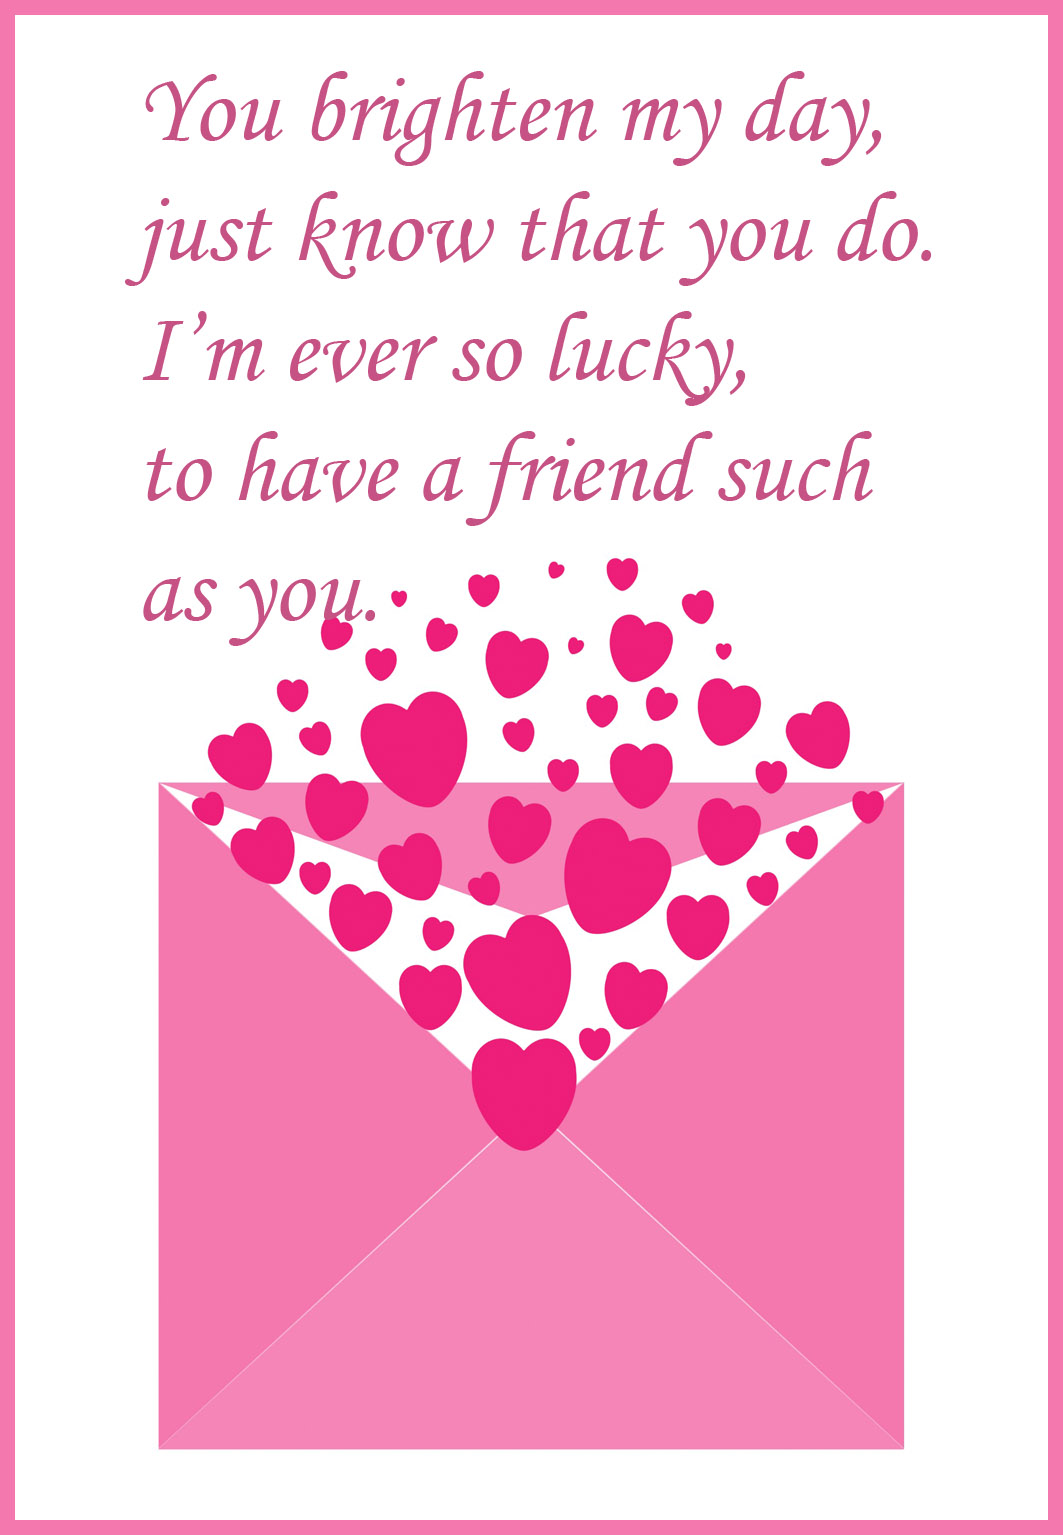 Friendship valentines day cards Amy Rees Anderson s Blog